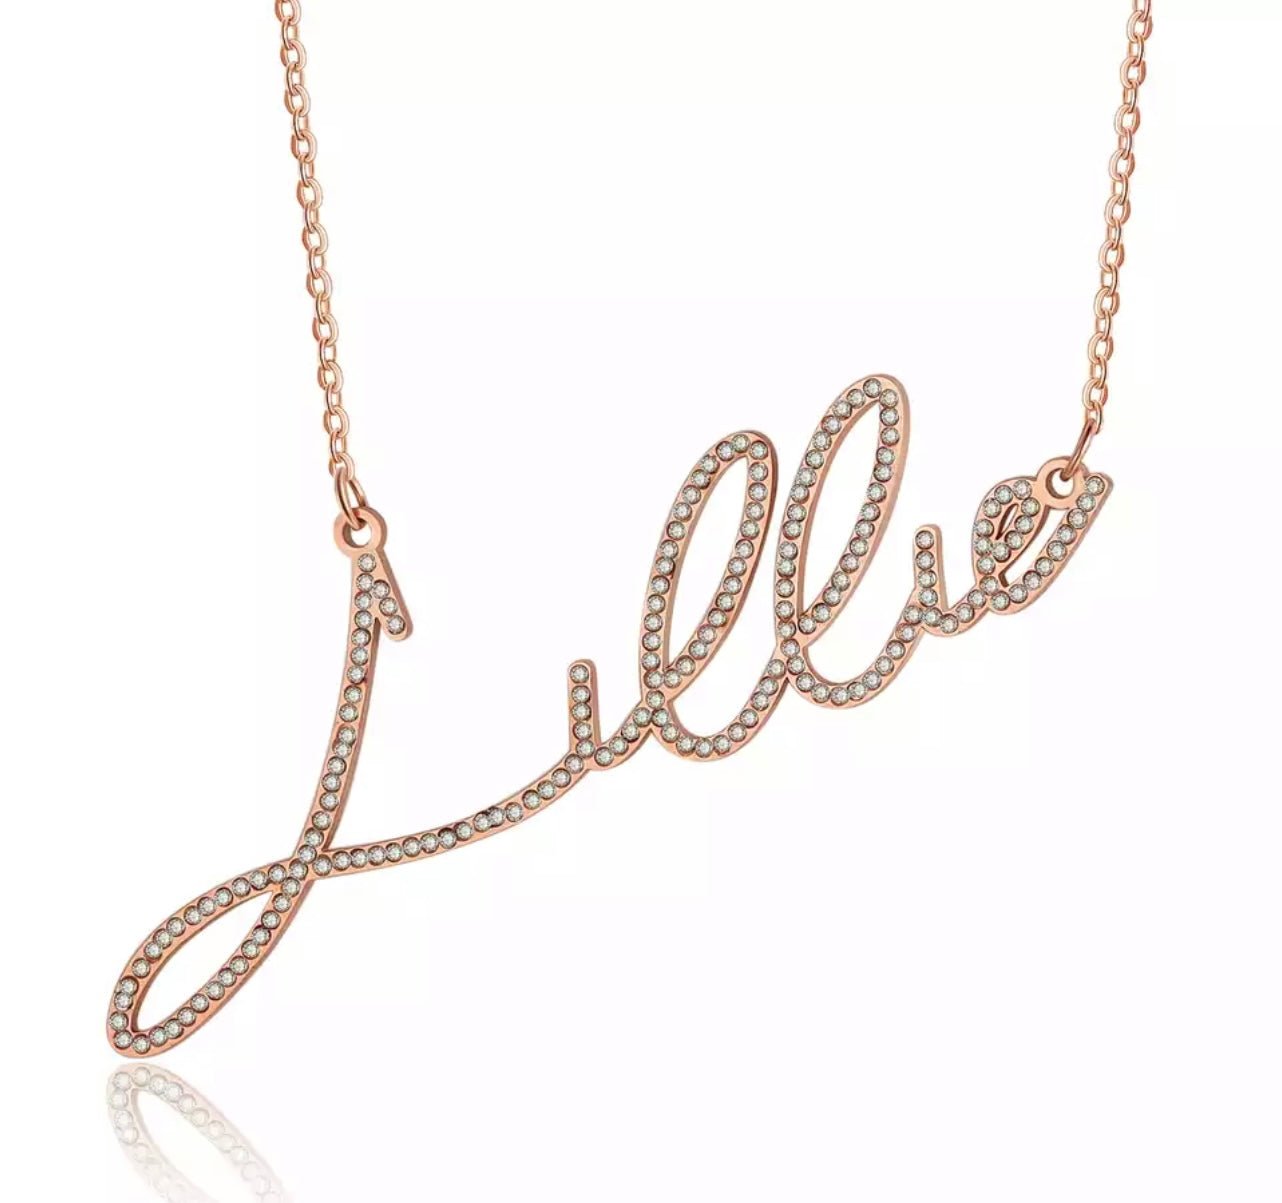 Personalised Iced Name Necklace - Luxe Emporium x